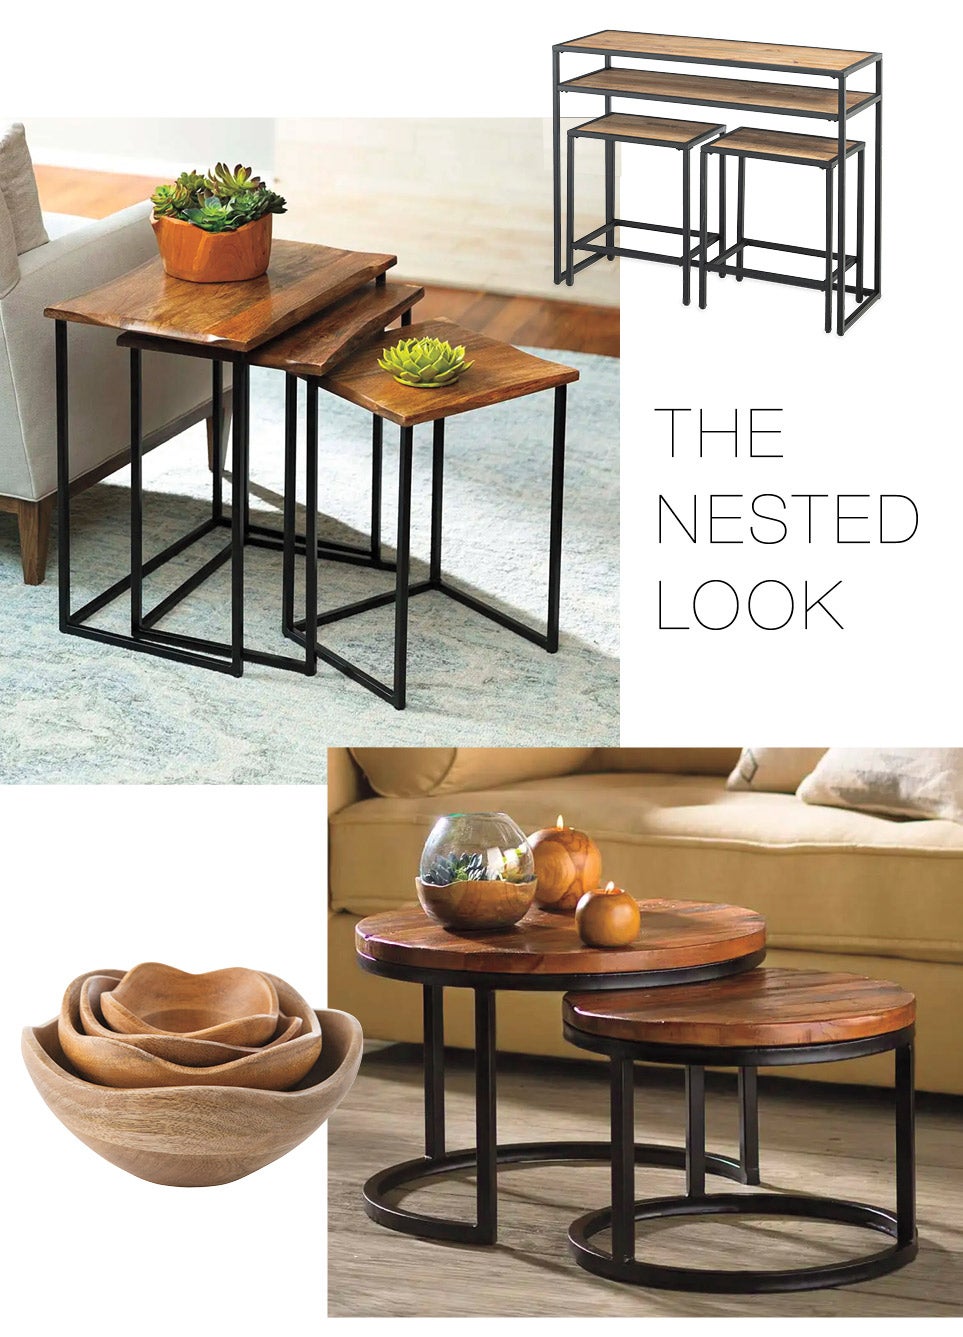 the nested look - image of assorted nesting tables